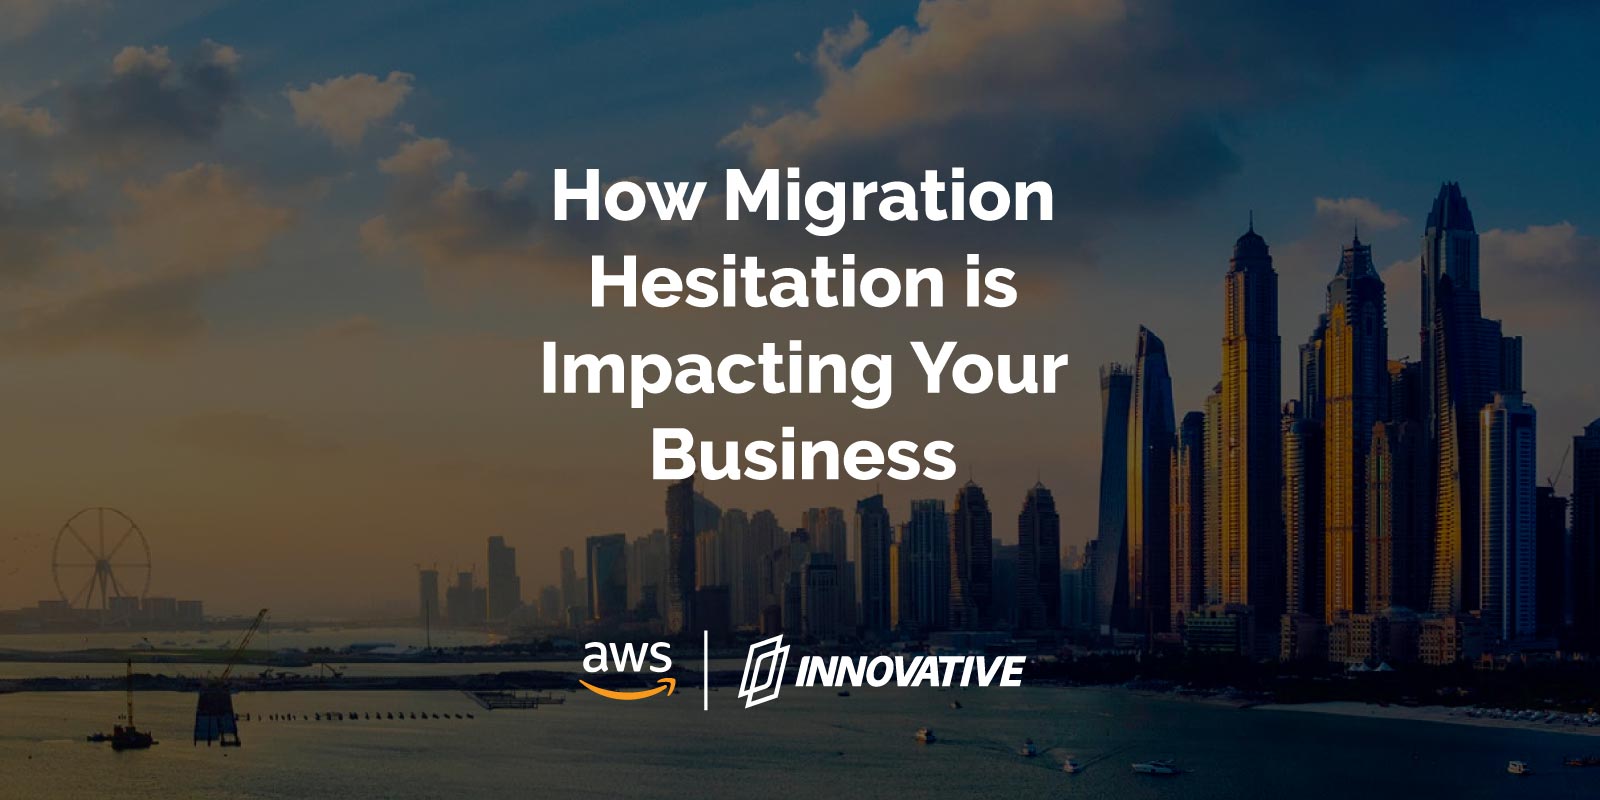 How Migration Hesitation is Impacting Your Business